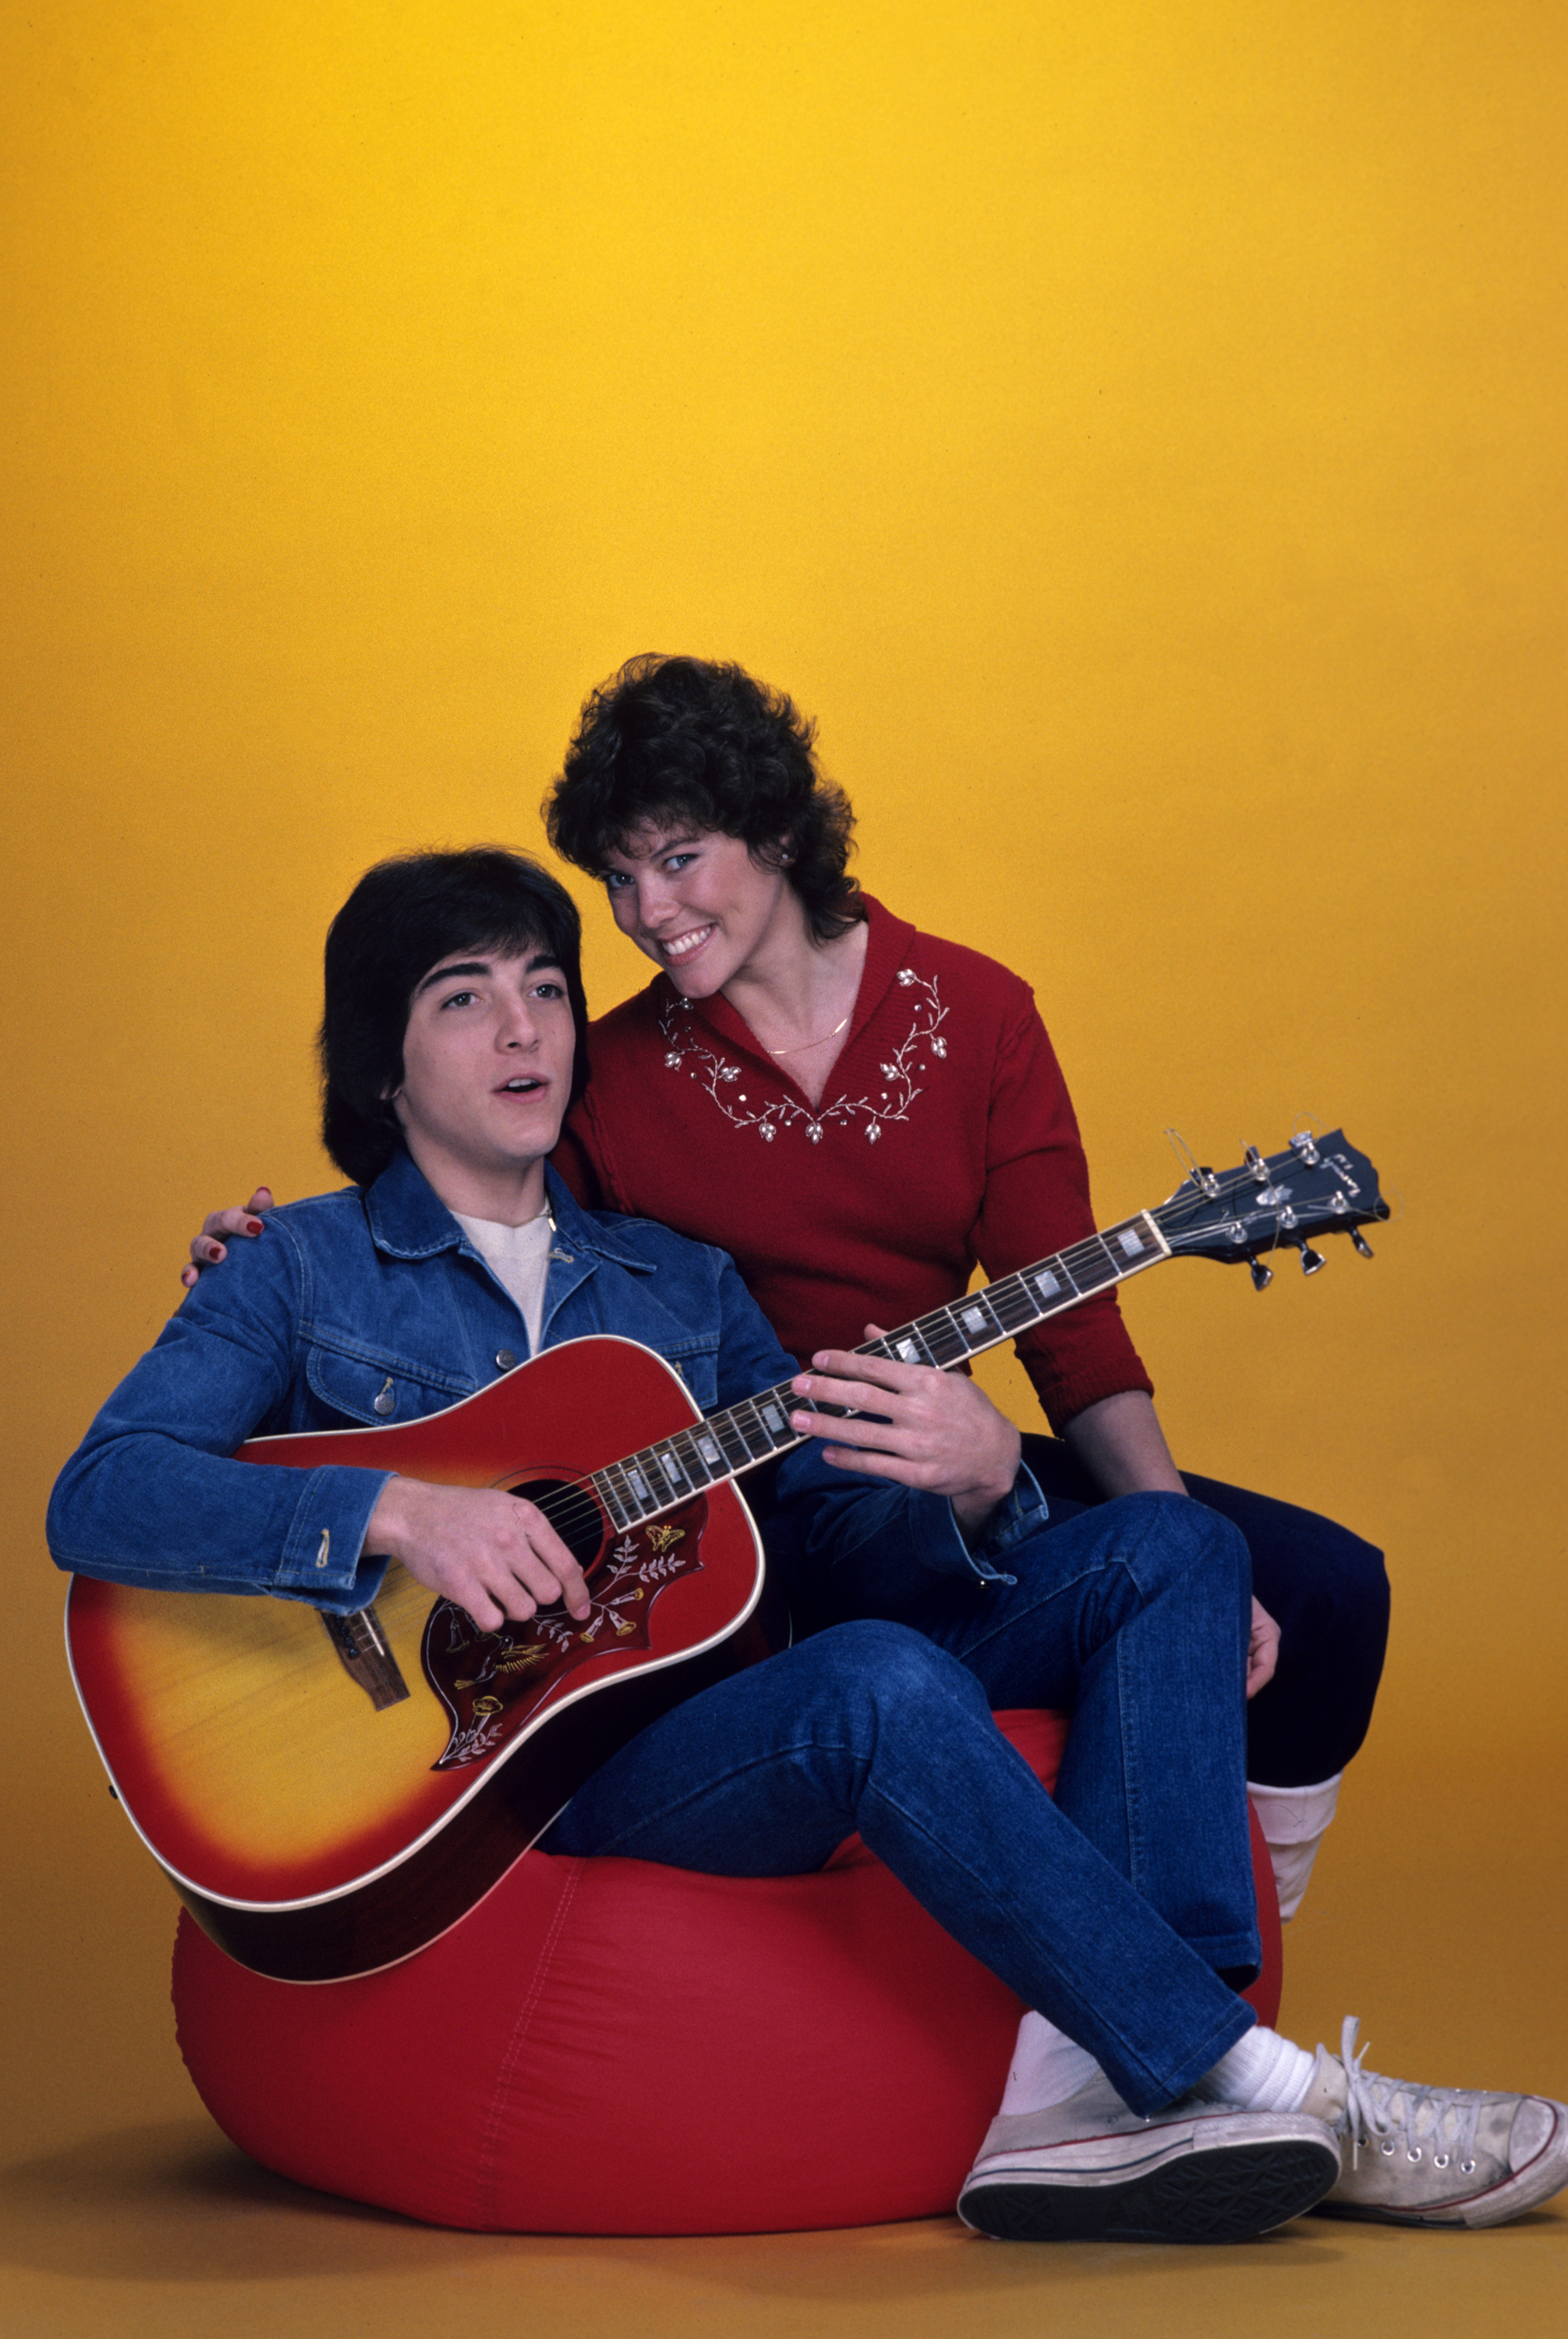 Actor Scott Baio and Erin Moran on the set of "Happy Days" on March 23,1982 | Source: Getty Images